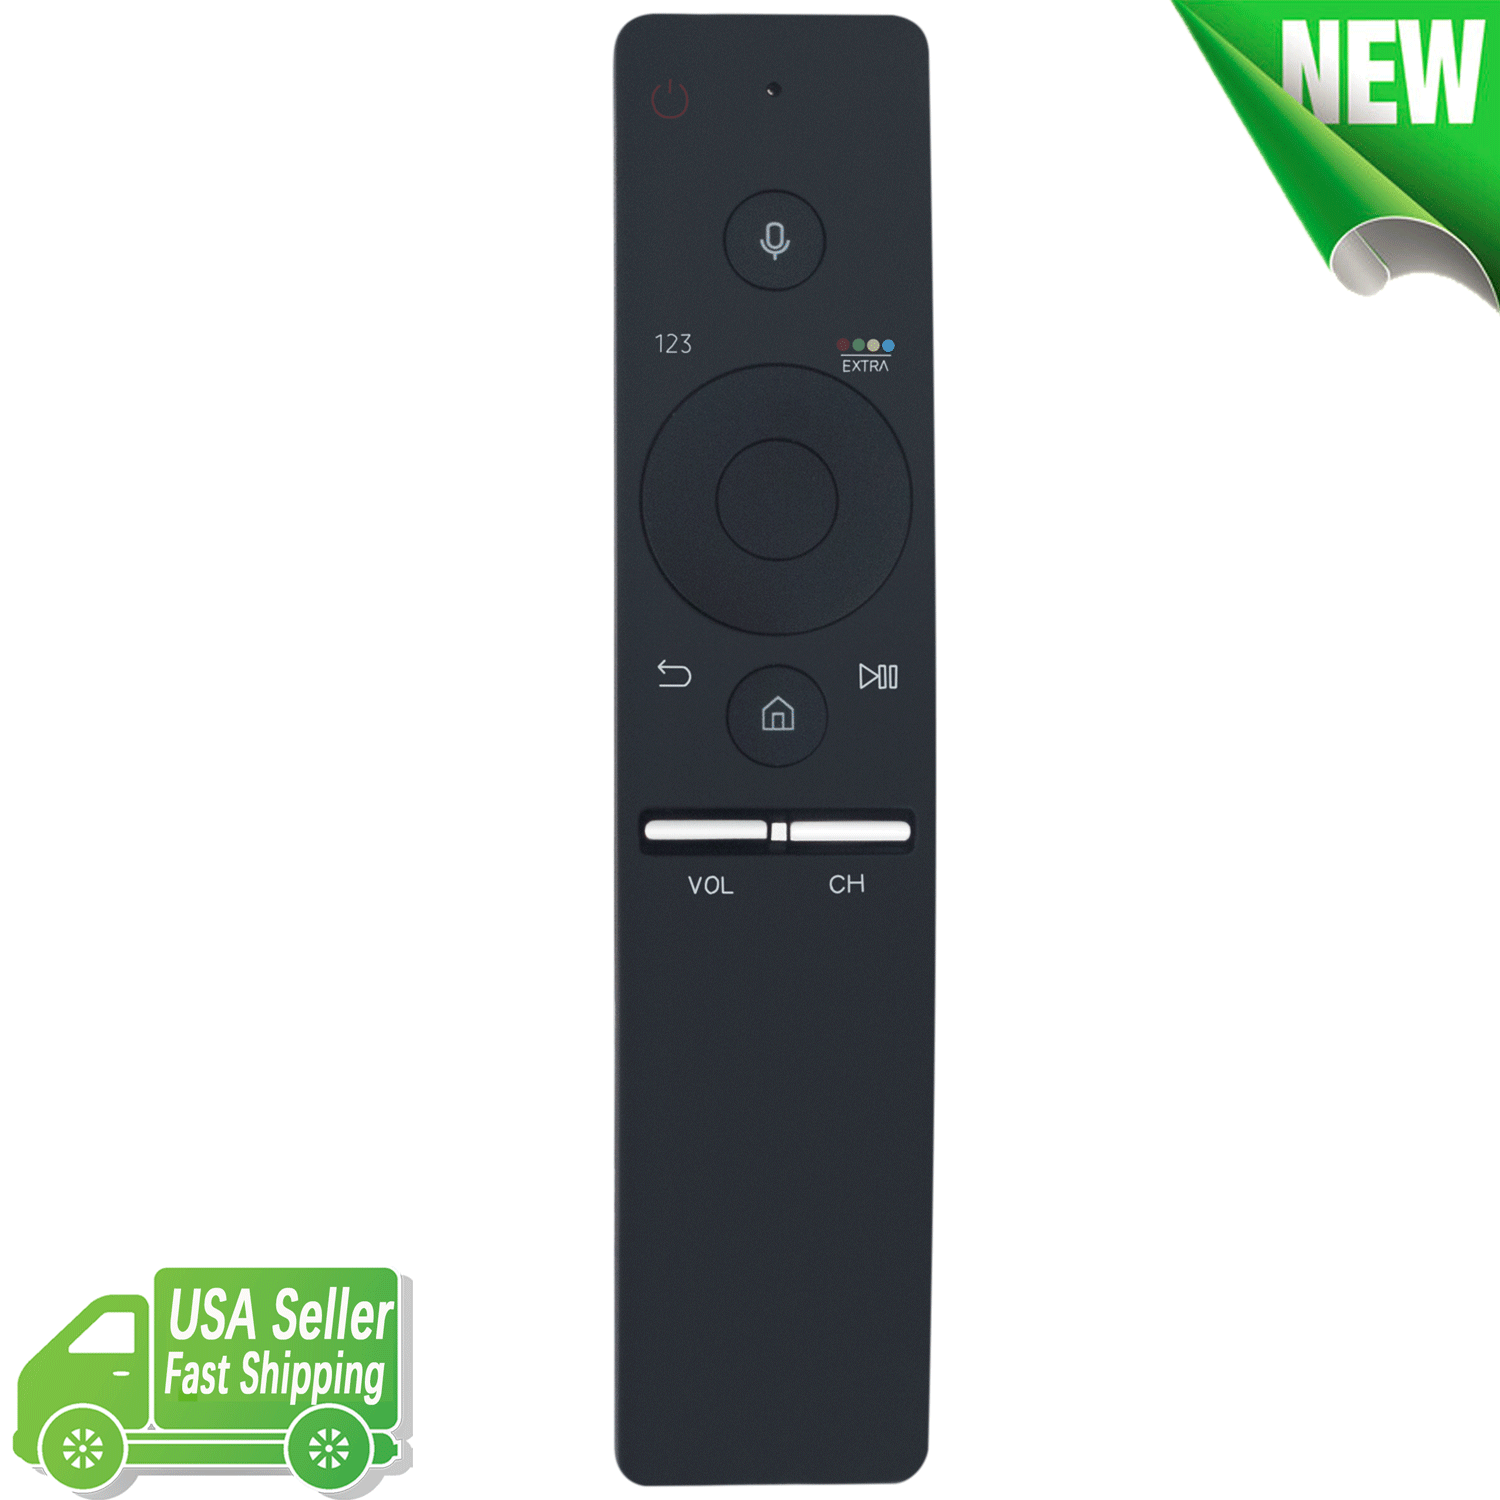 BN59-01242A Replacement Voice Remote Control for Samsung Sma